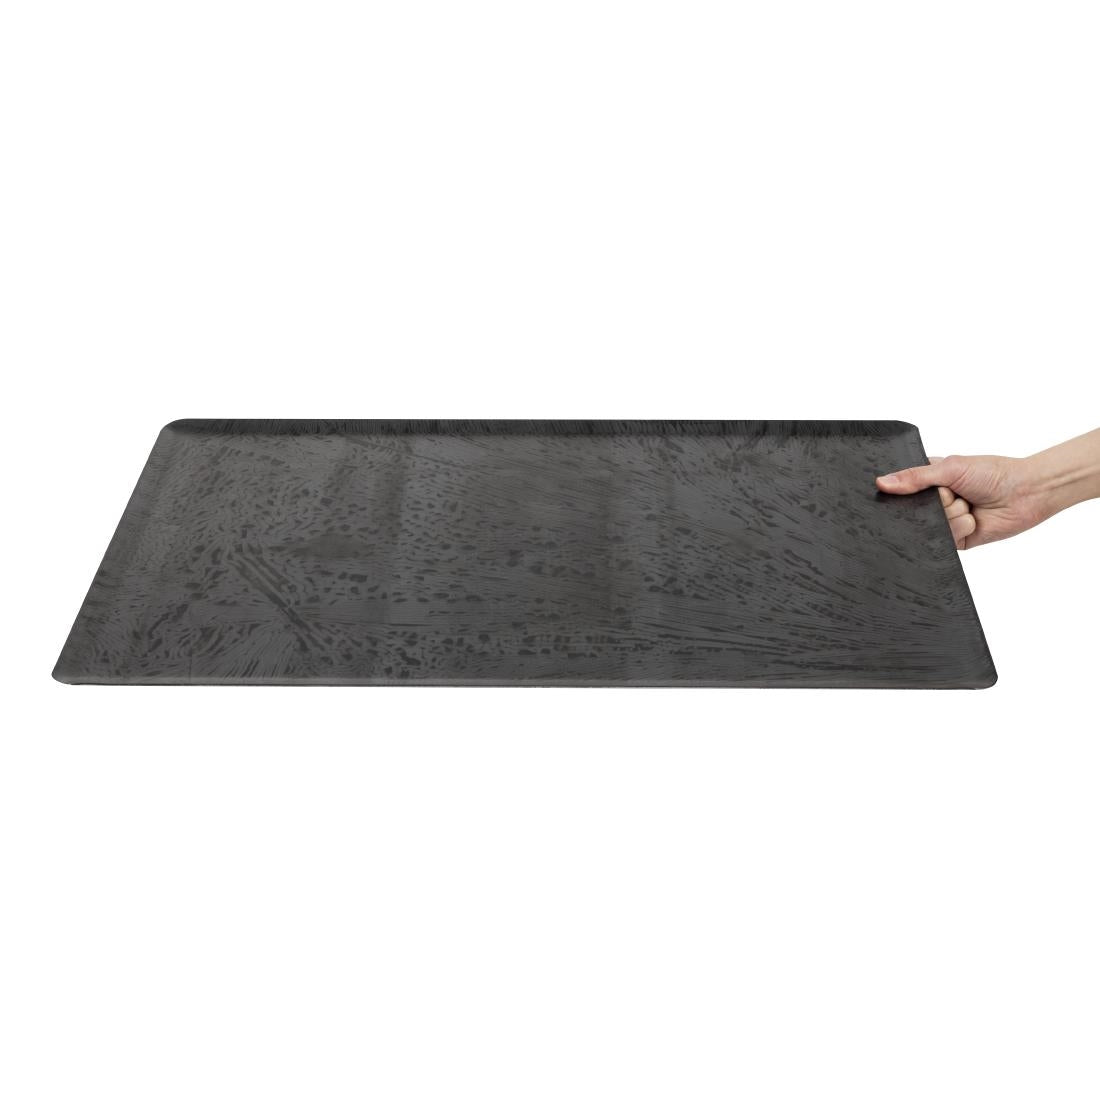 Bourgeat Blued Steel Baking Tray 600 x 400mm JD Catering Equipment Solutions Ltd